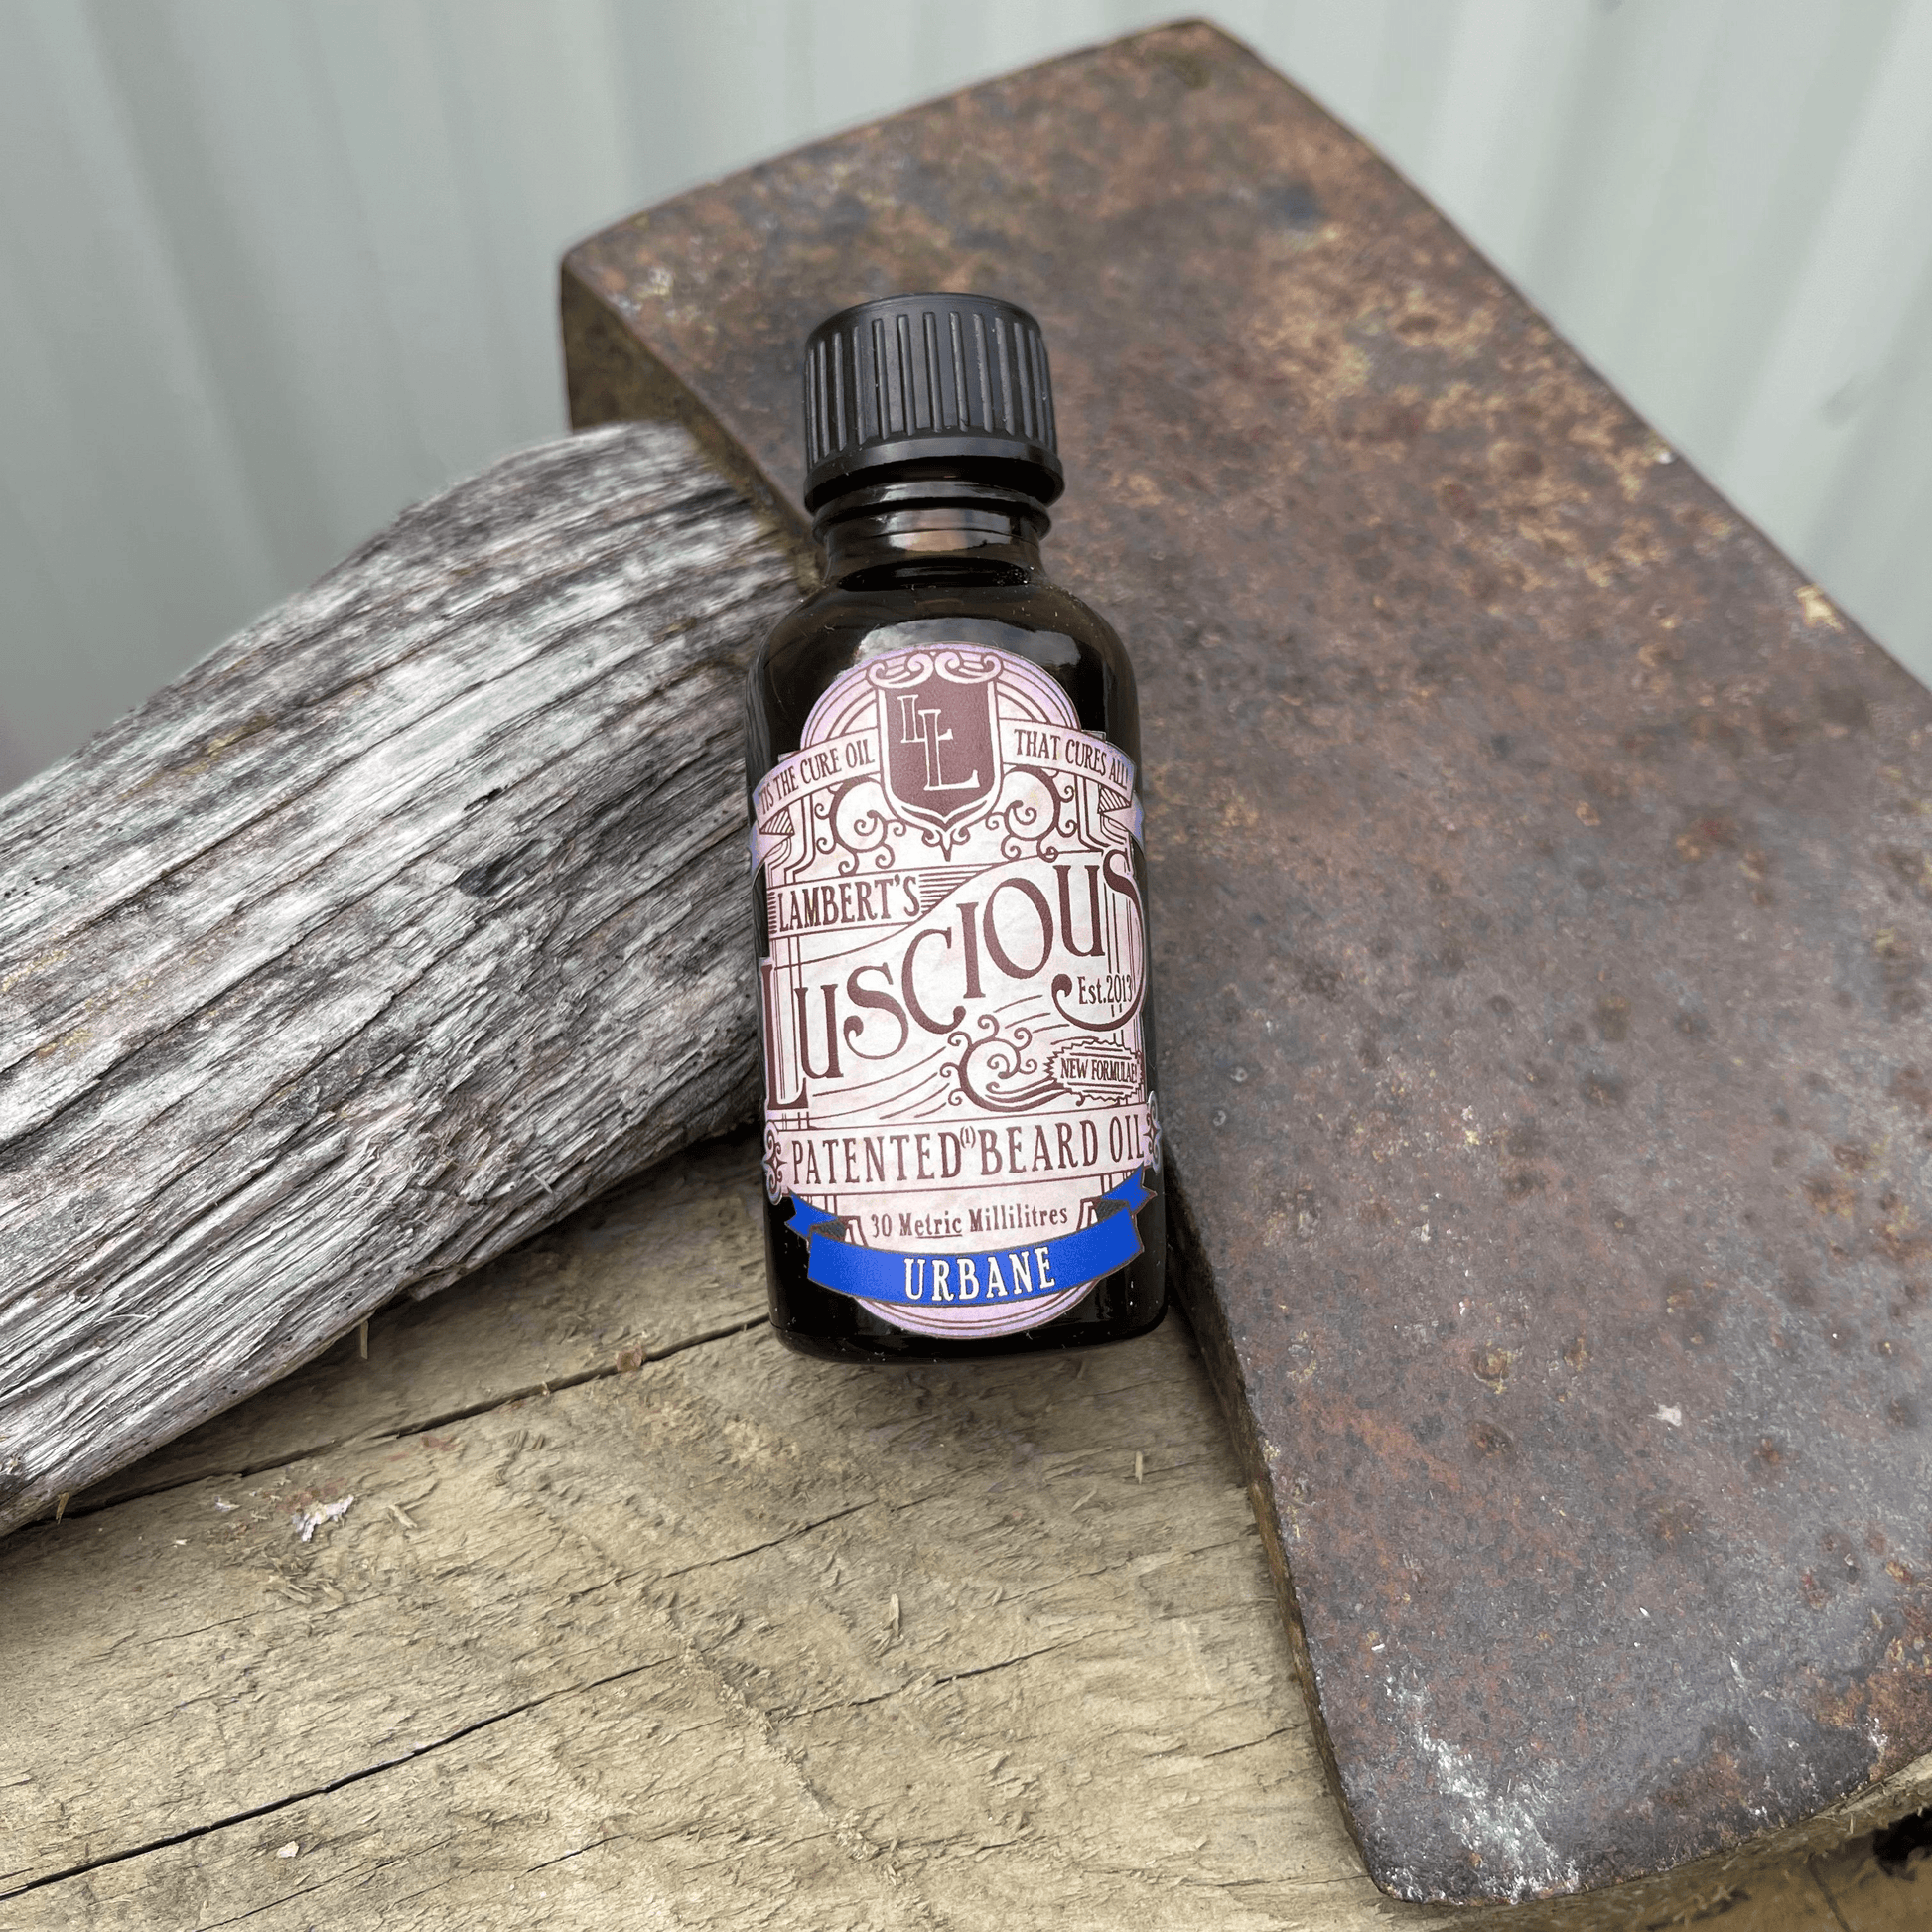 Small bottle of beard oil from Lamberts Luscious resting against an axe blade.